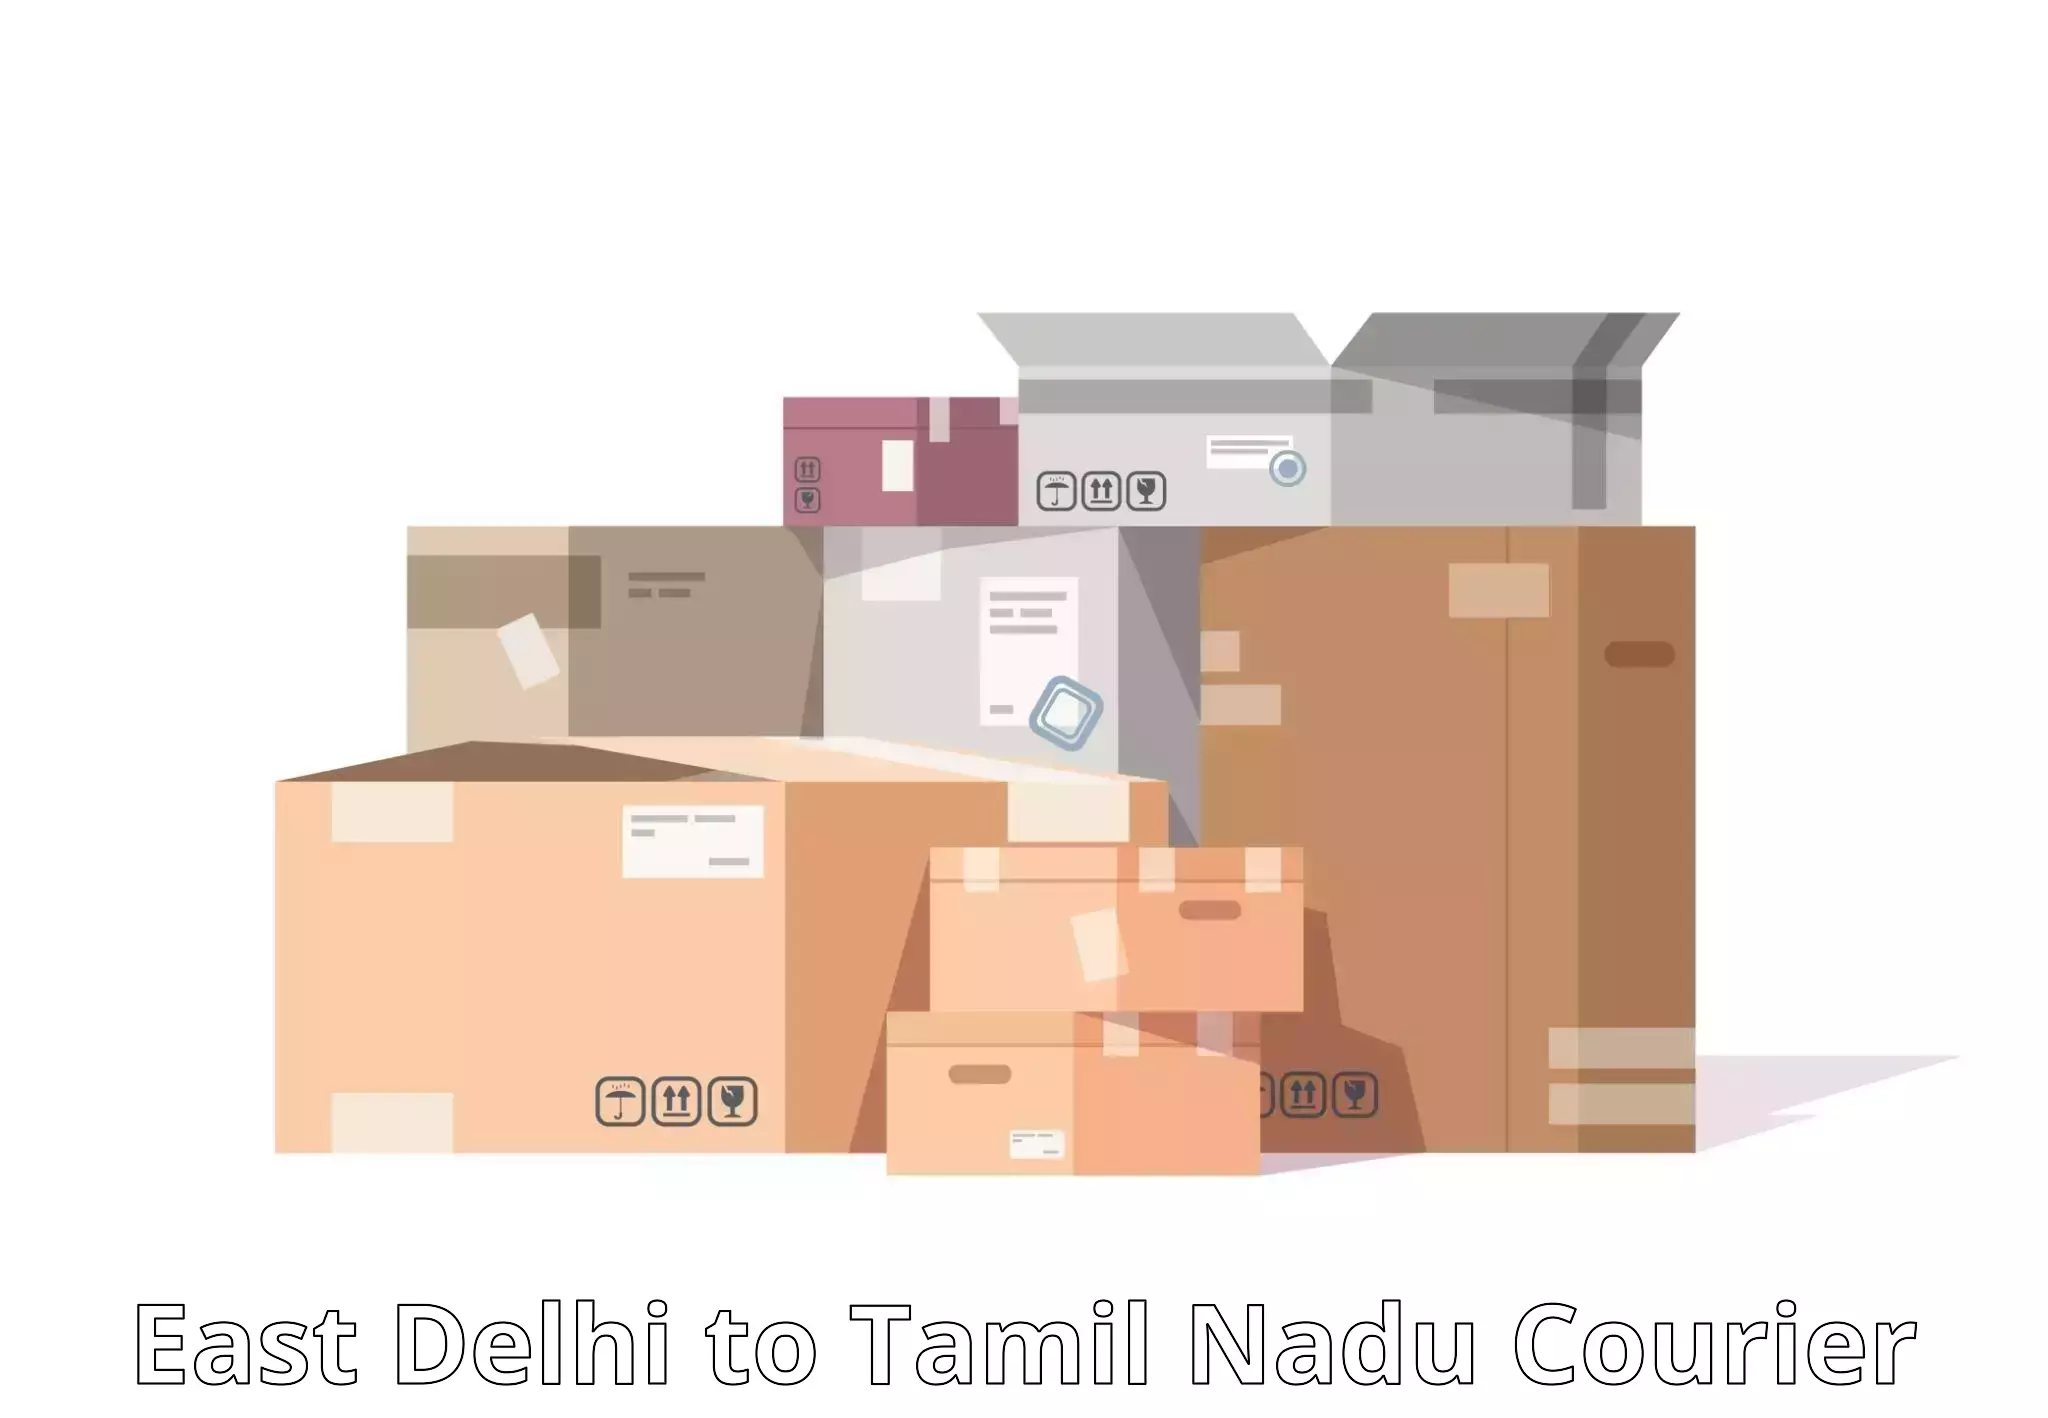 Global shipping networks in East Delhi to Anna University Chennai